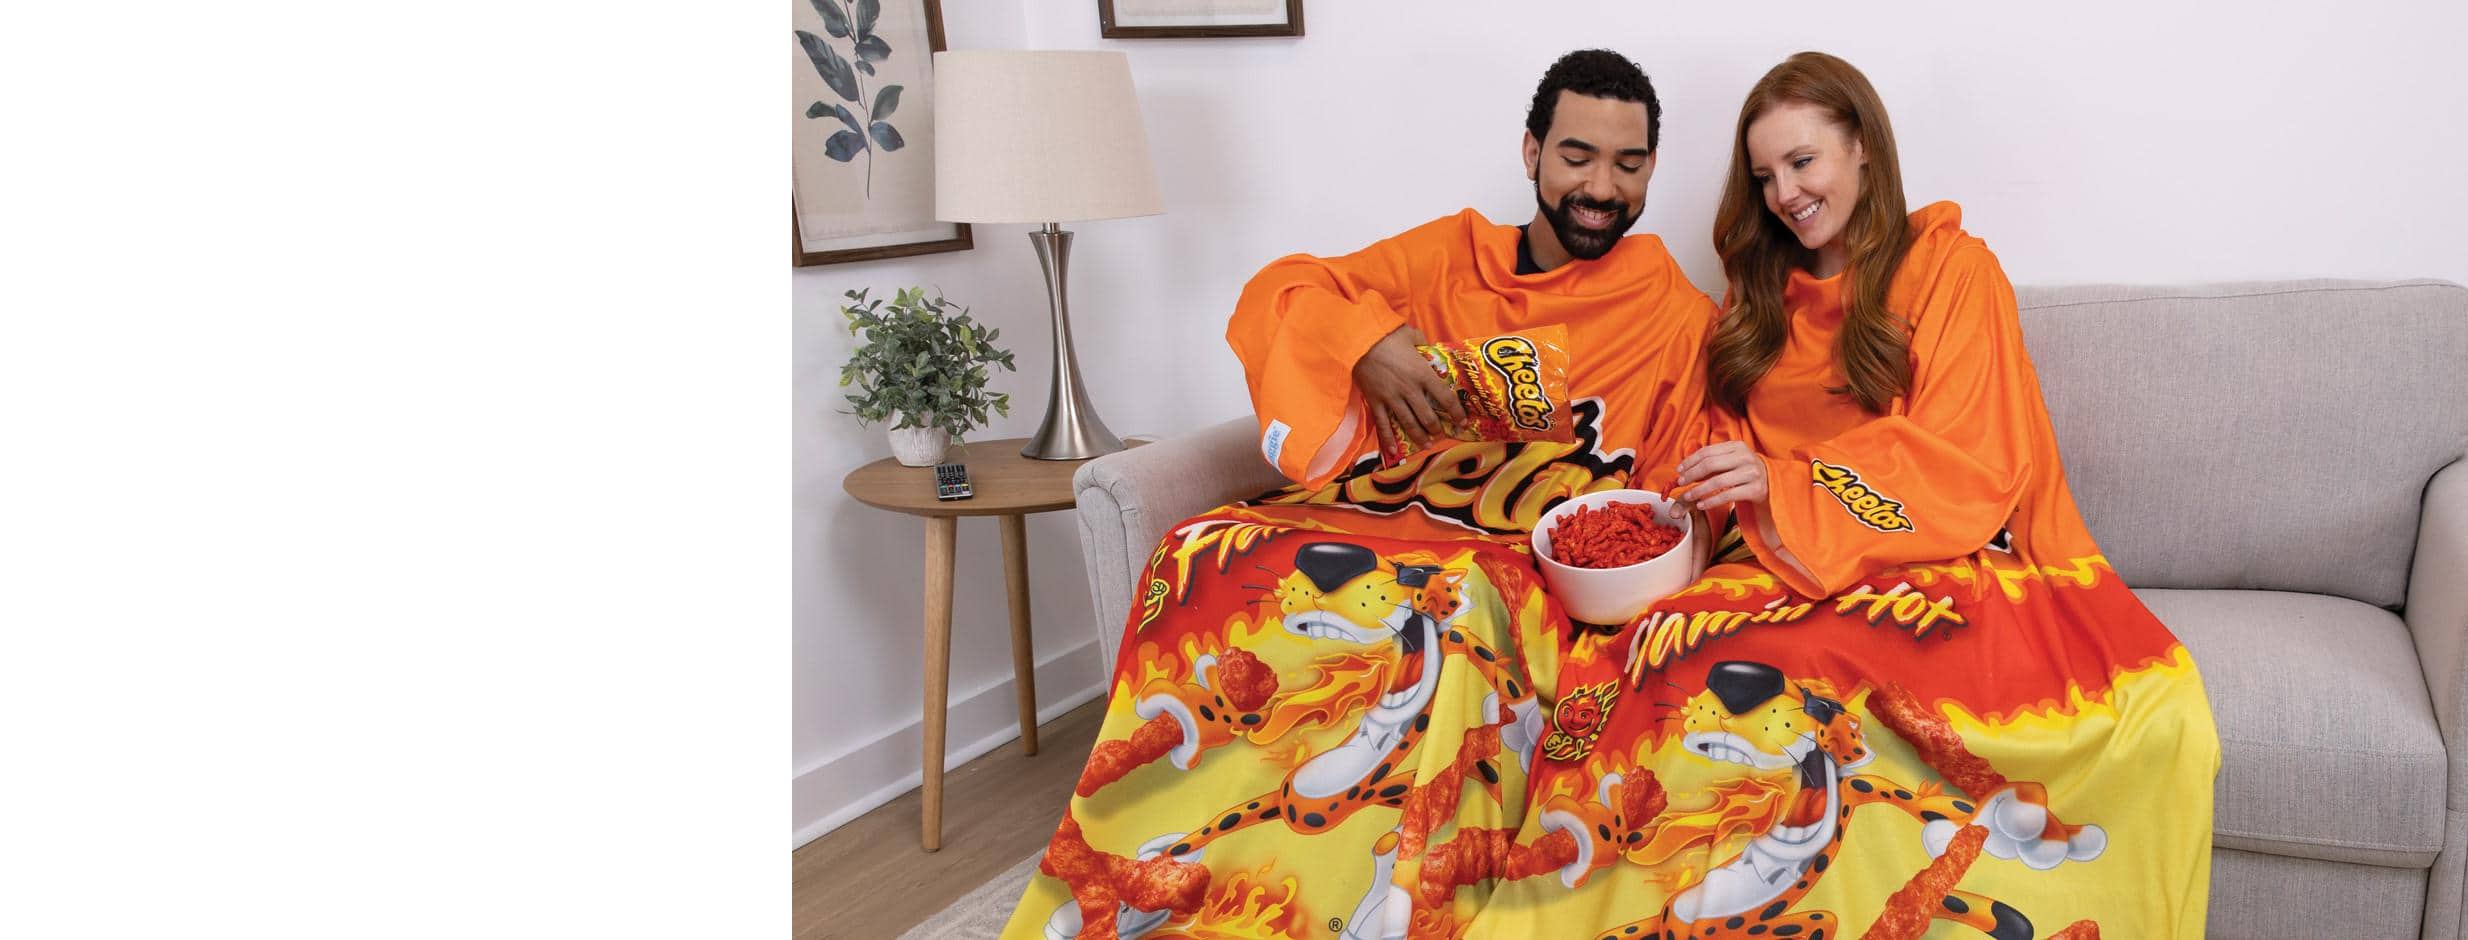 Snuggie The Original Wearable Blanket with Sleeves, Super Soft Throw  Fleece, Doritos Cool Ranch